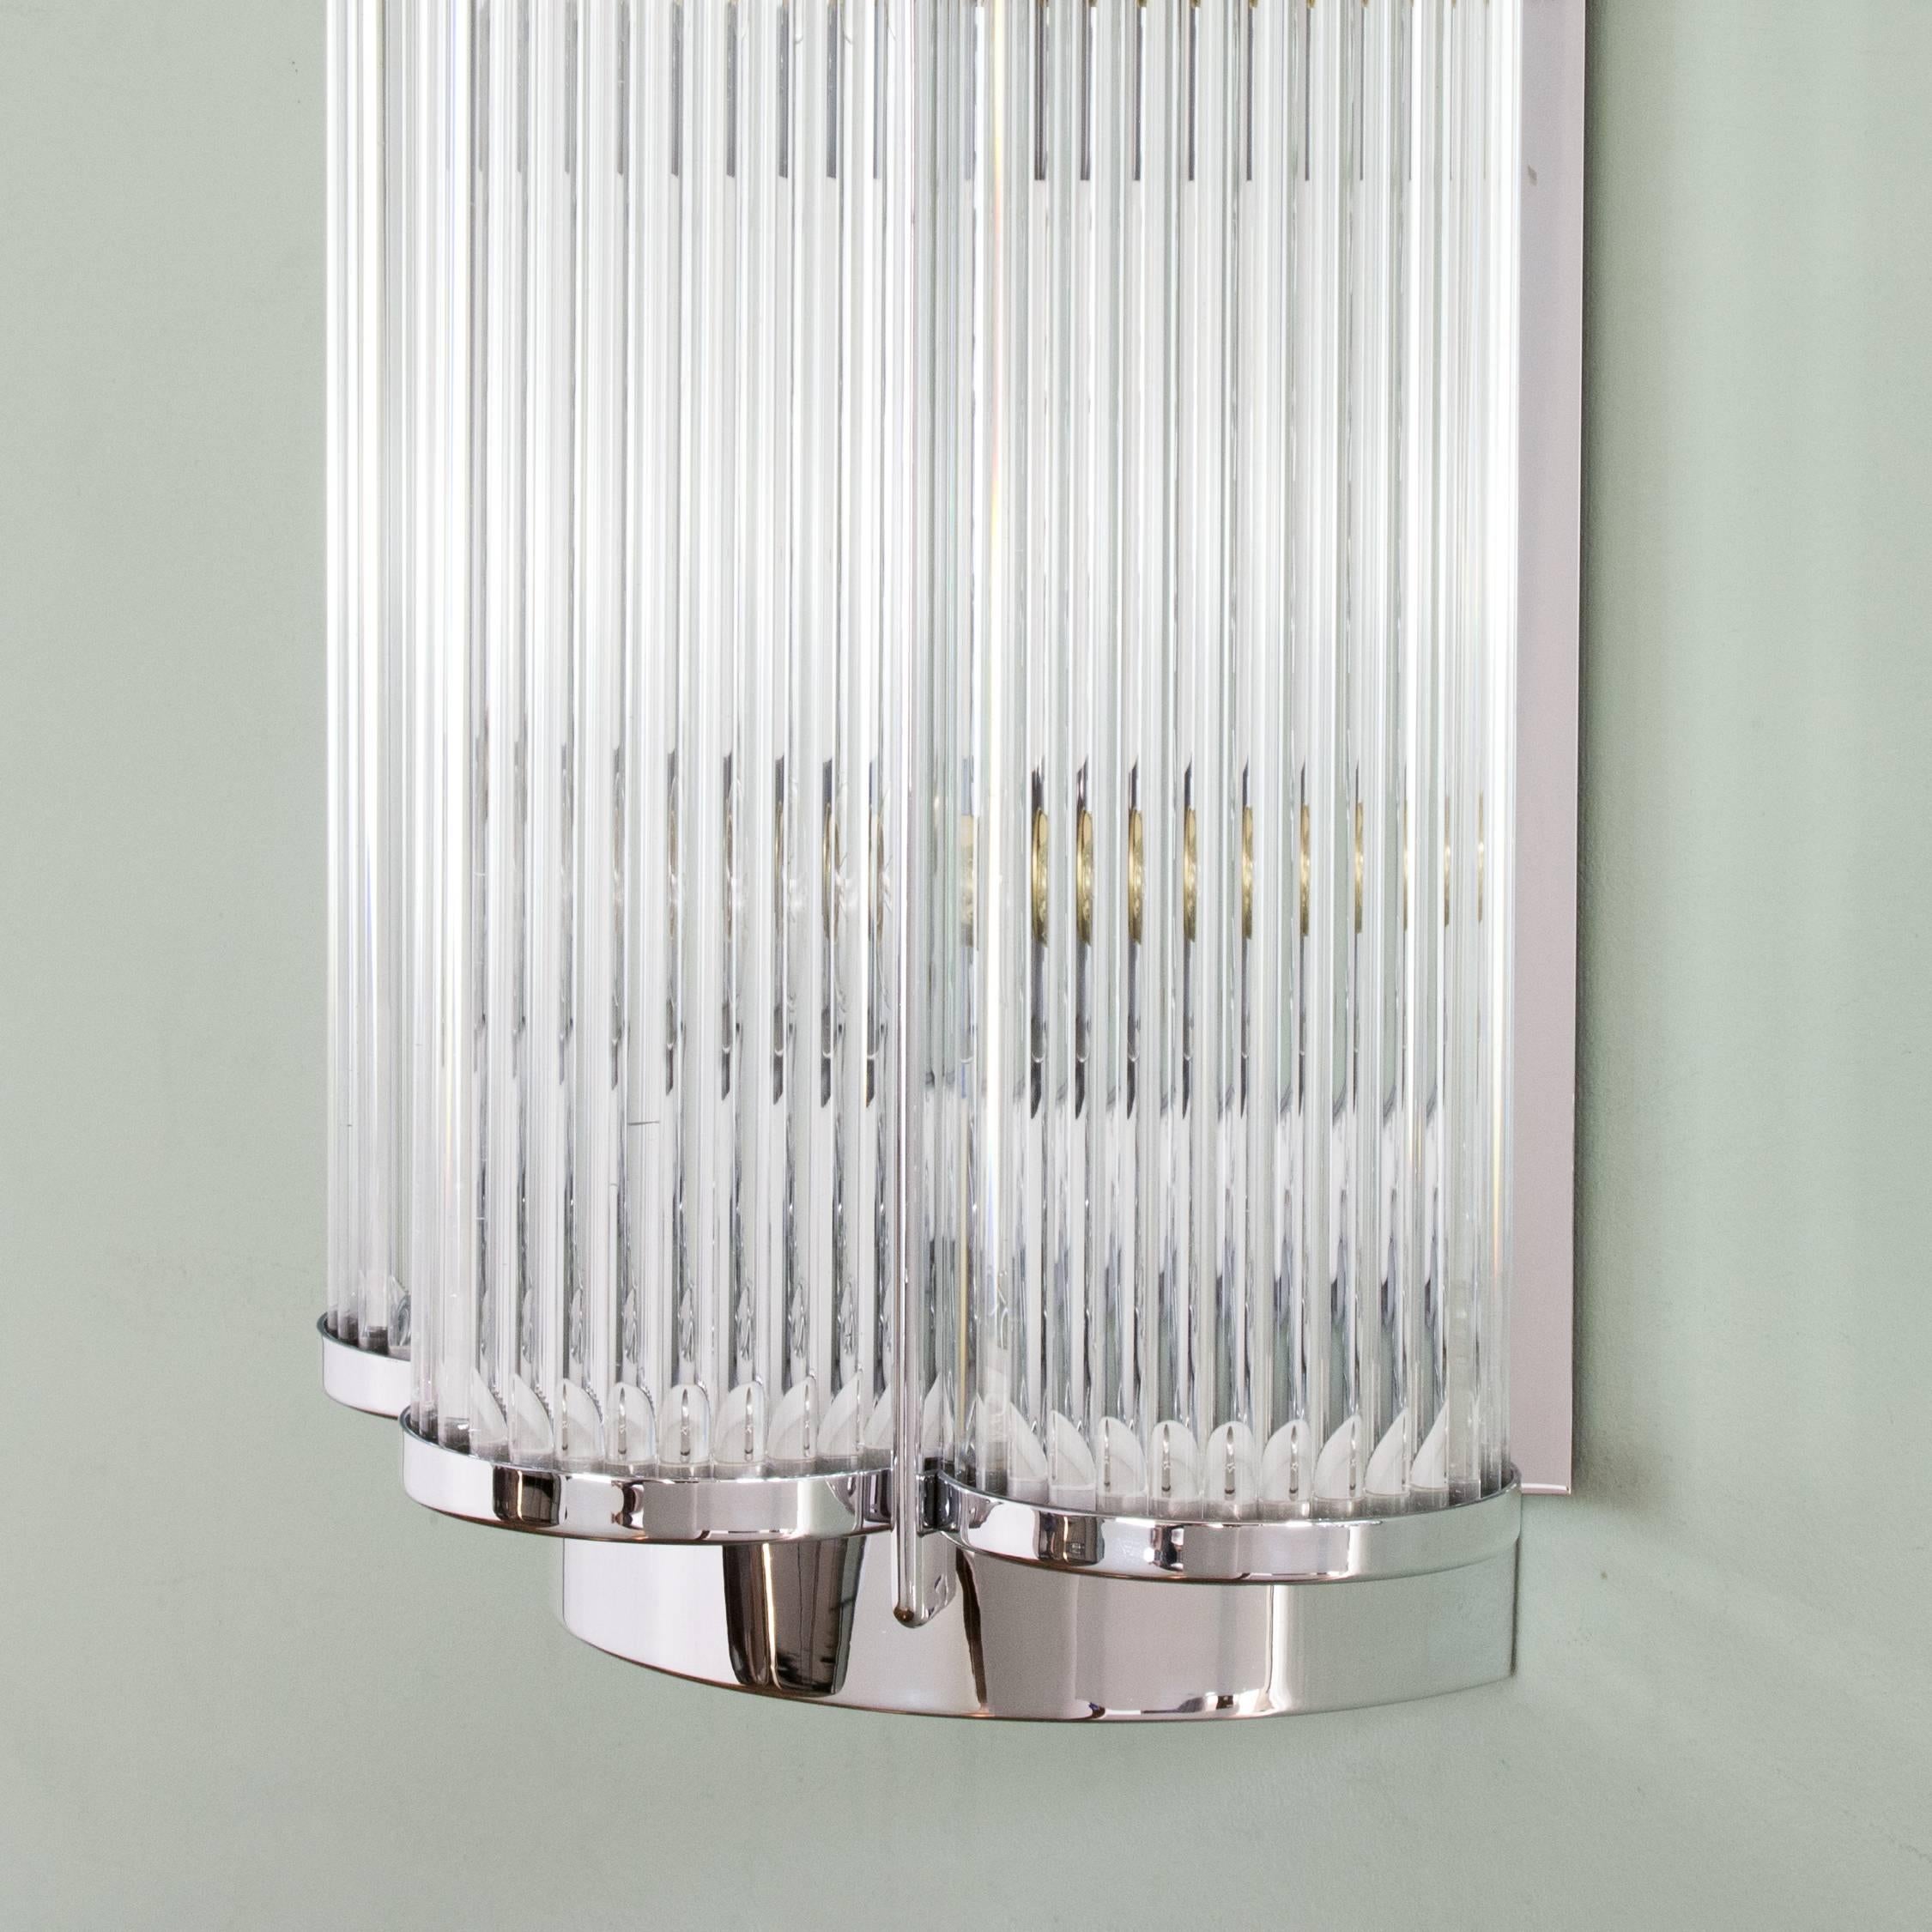 A pair of Art Deco style wall lights, made by LASSCO, with chrome and glass rod trefoil body, with four light fittings. Handmade in England to order, usual lead time six weeks.

Dimensions: 83cm (32¾